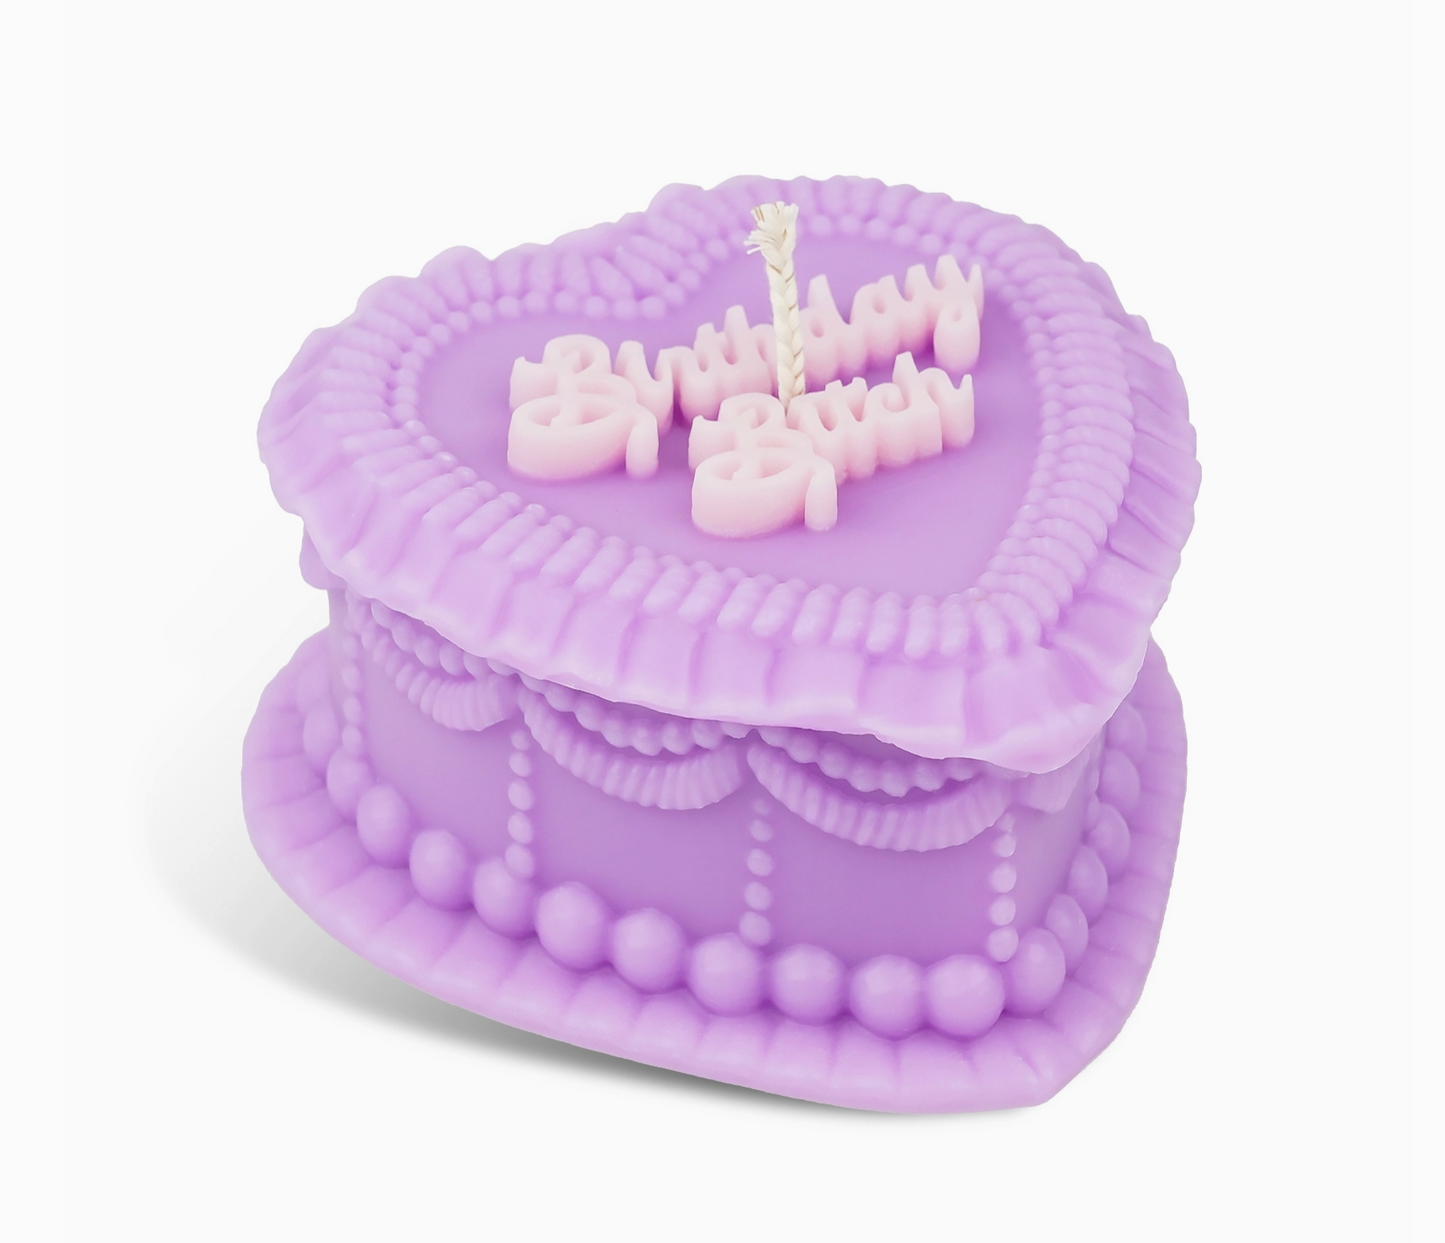 Birthday Bitch Vintage Heart-Shaped Cake Soy Candle - 13.5 Ounces